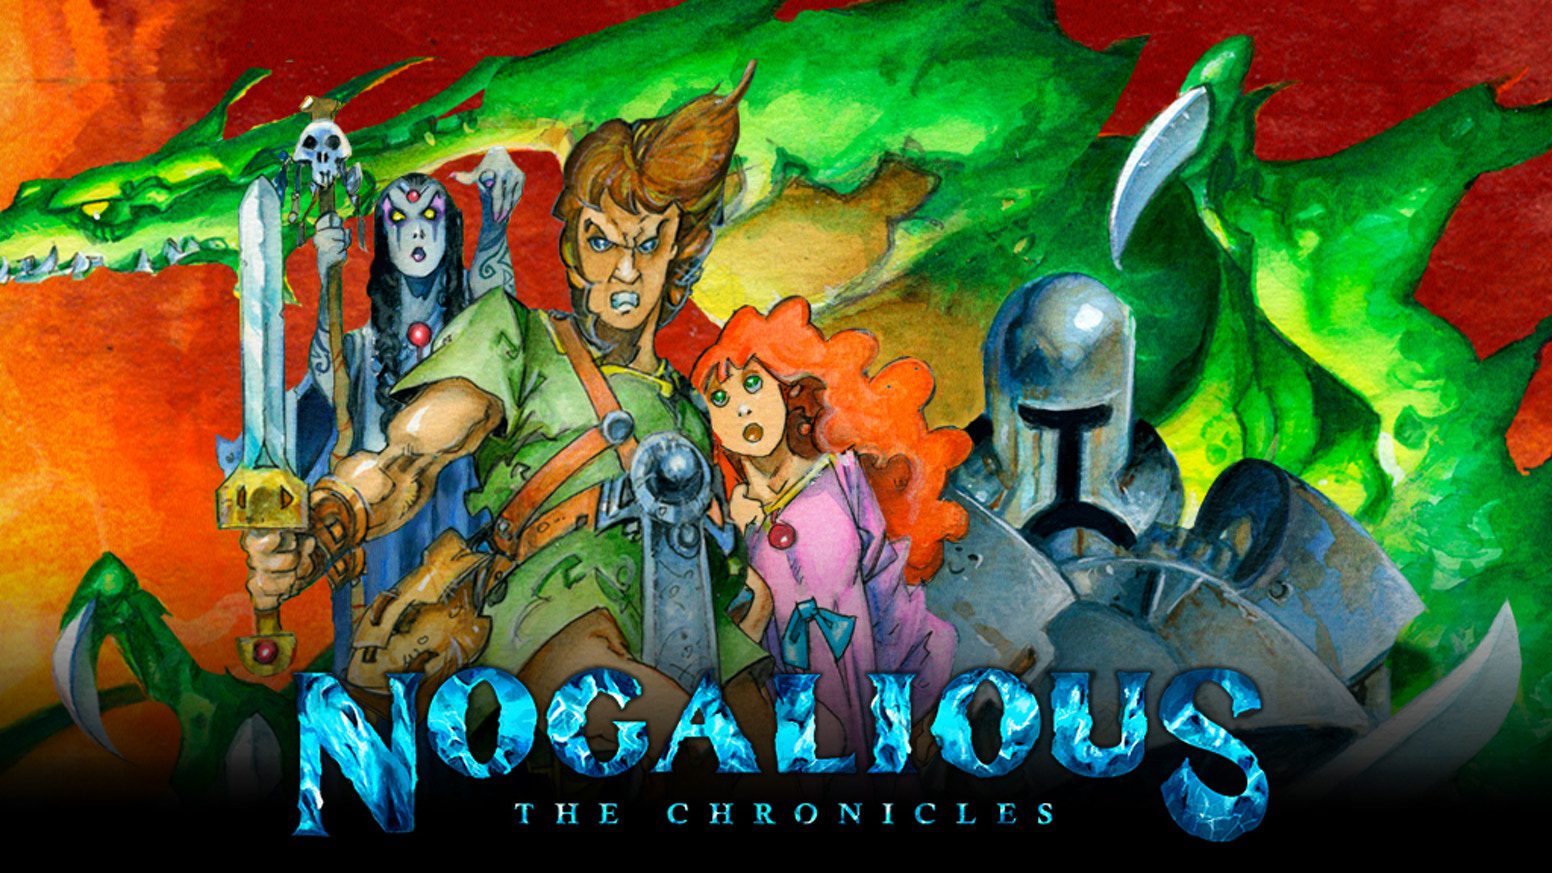 Nogalious review: the days of the 8-bit computer platformer are alive and well here